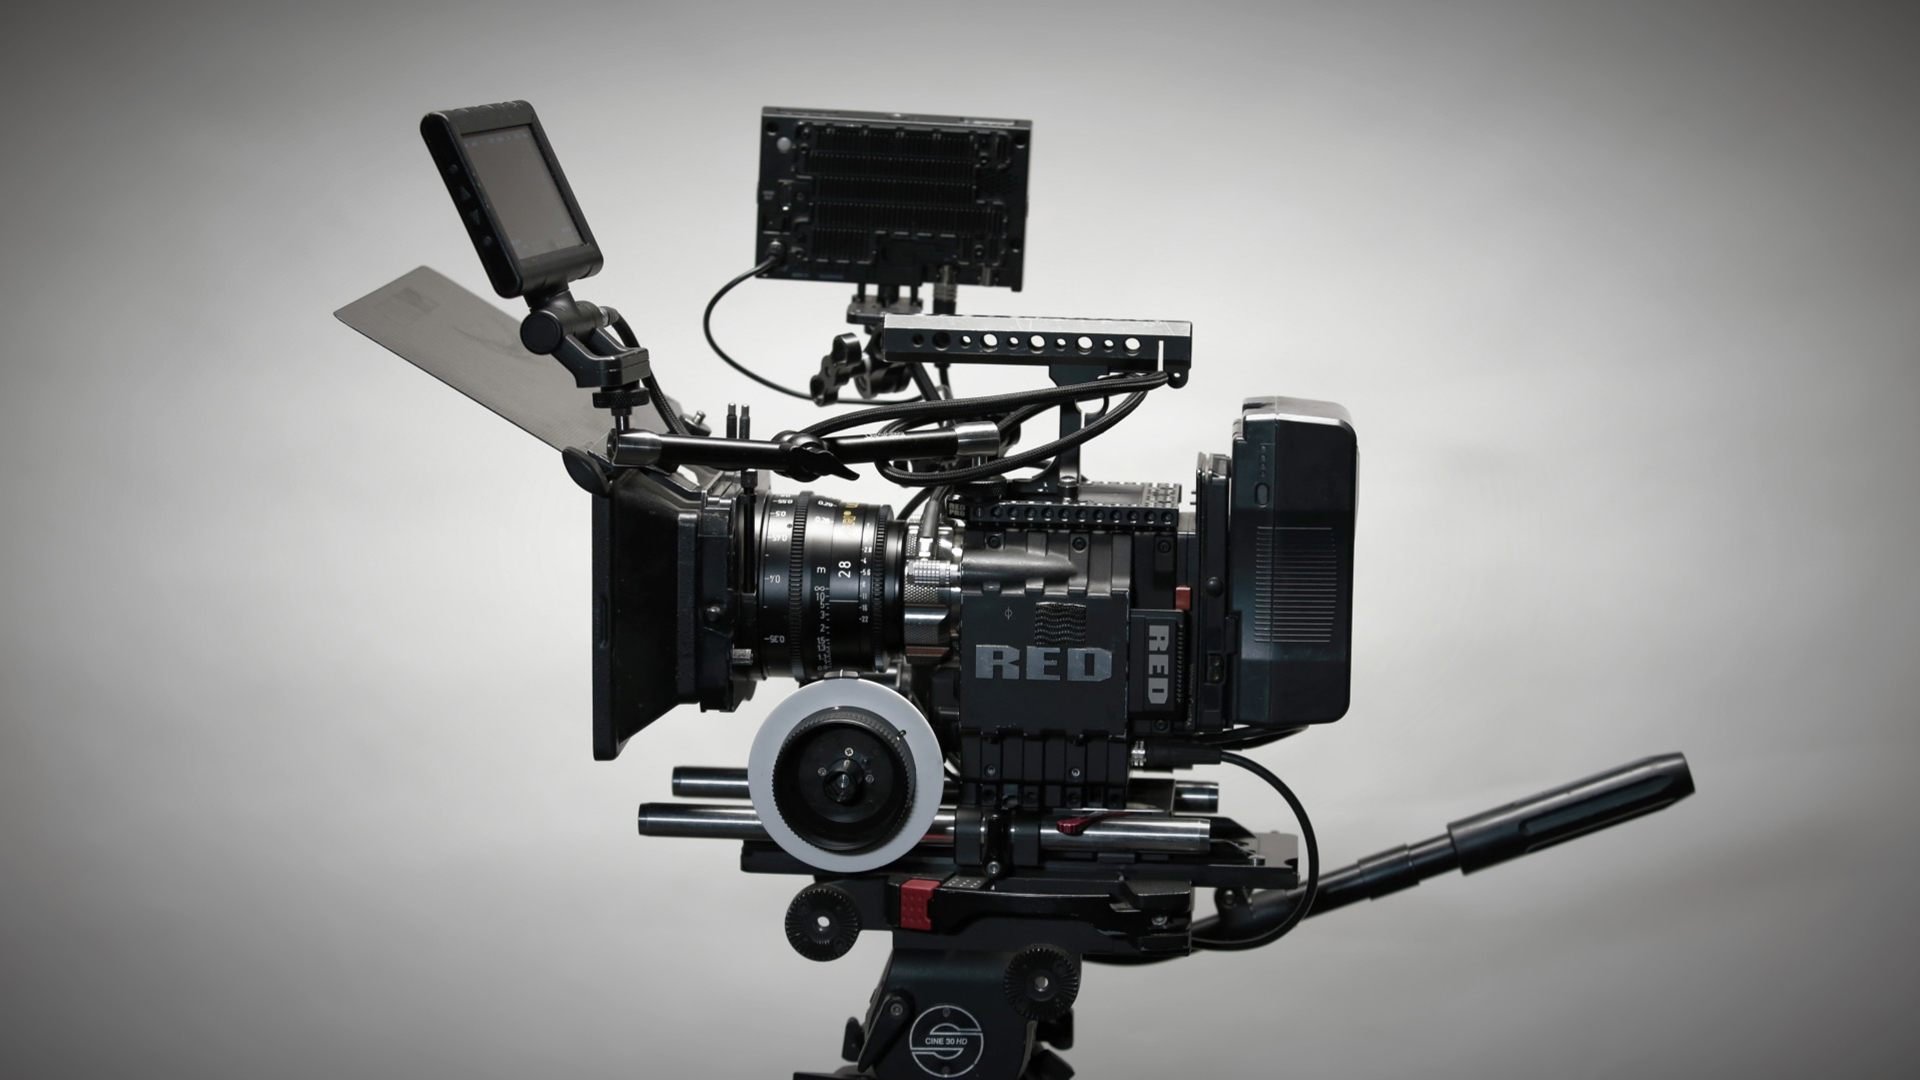 Know more about crowdfunding video production companies